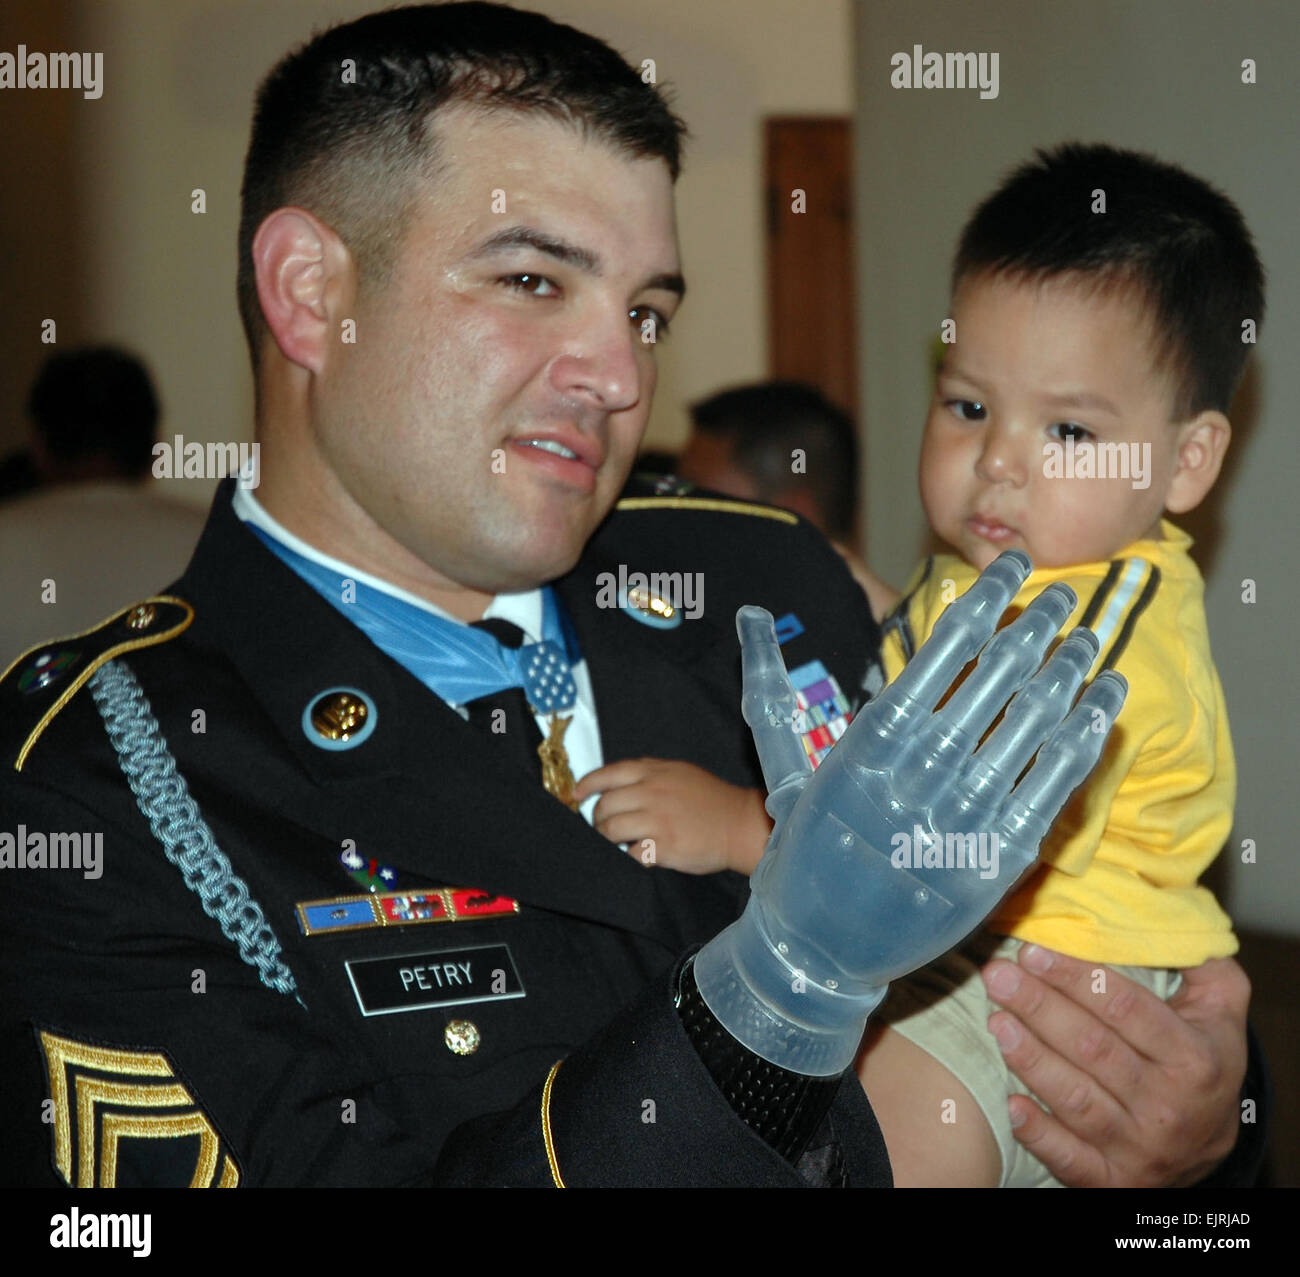 Slideshows for Sergeant First Class Leroy A. Petry - Medal of Honor  Recipient for the United States Army